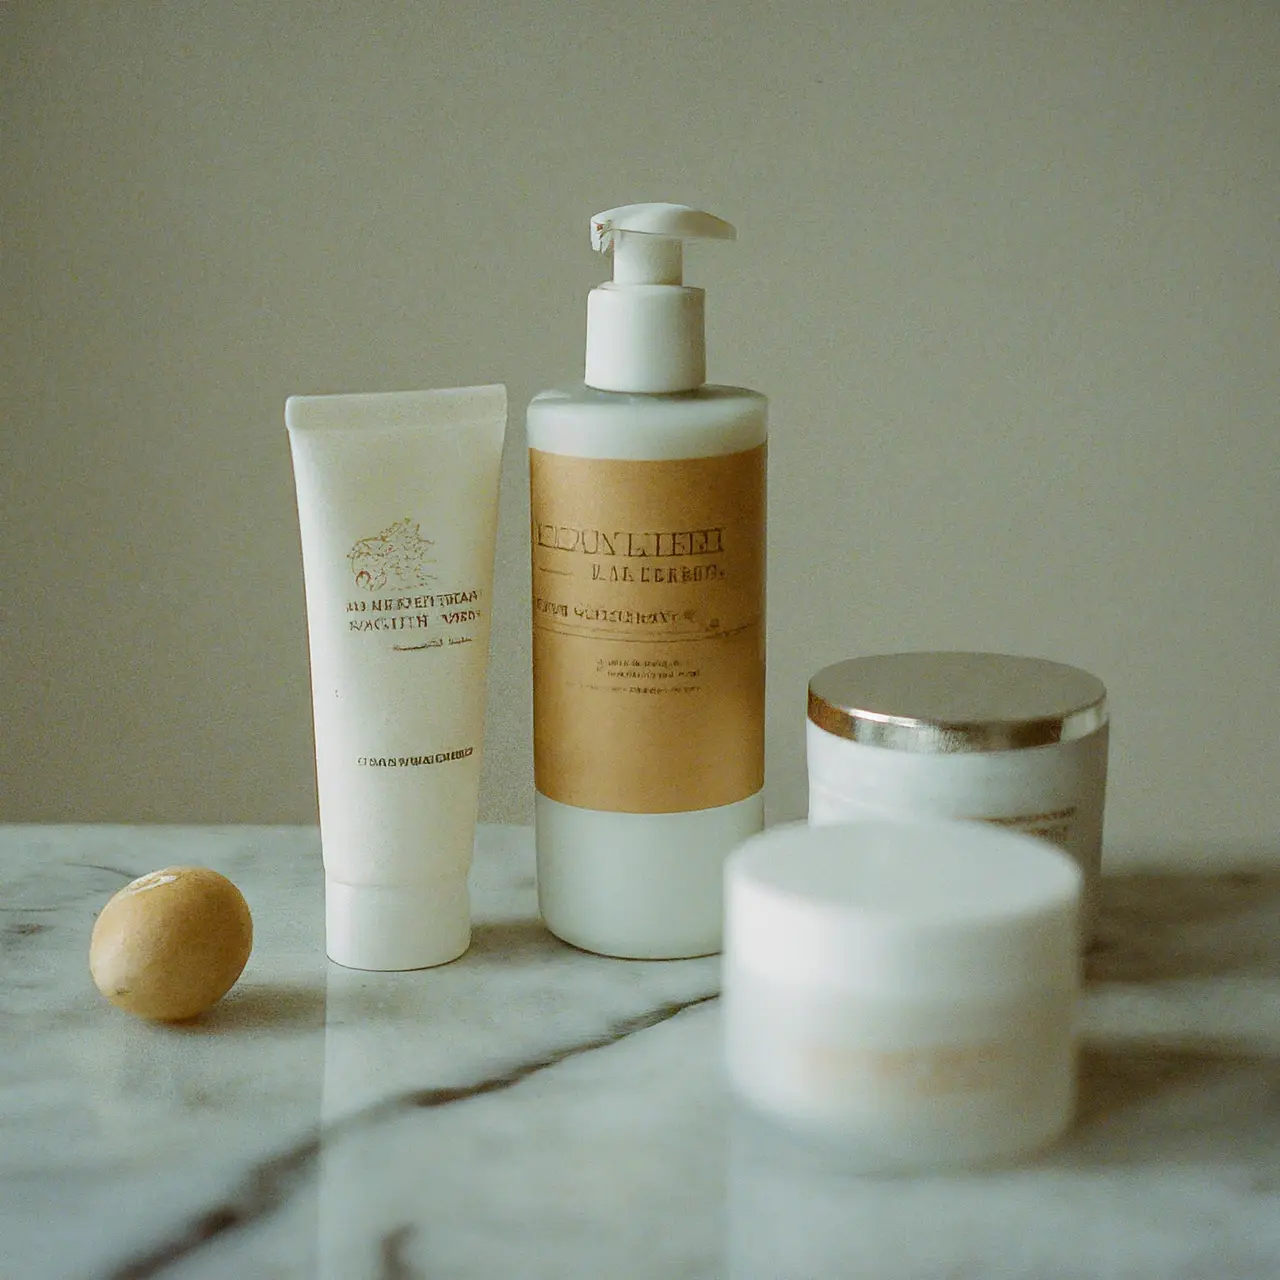 A variety of skincare products arranged on a marble surface 35mm stock photo